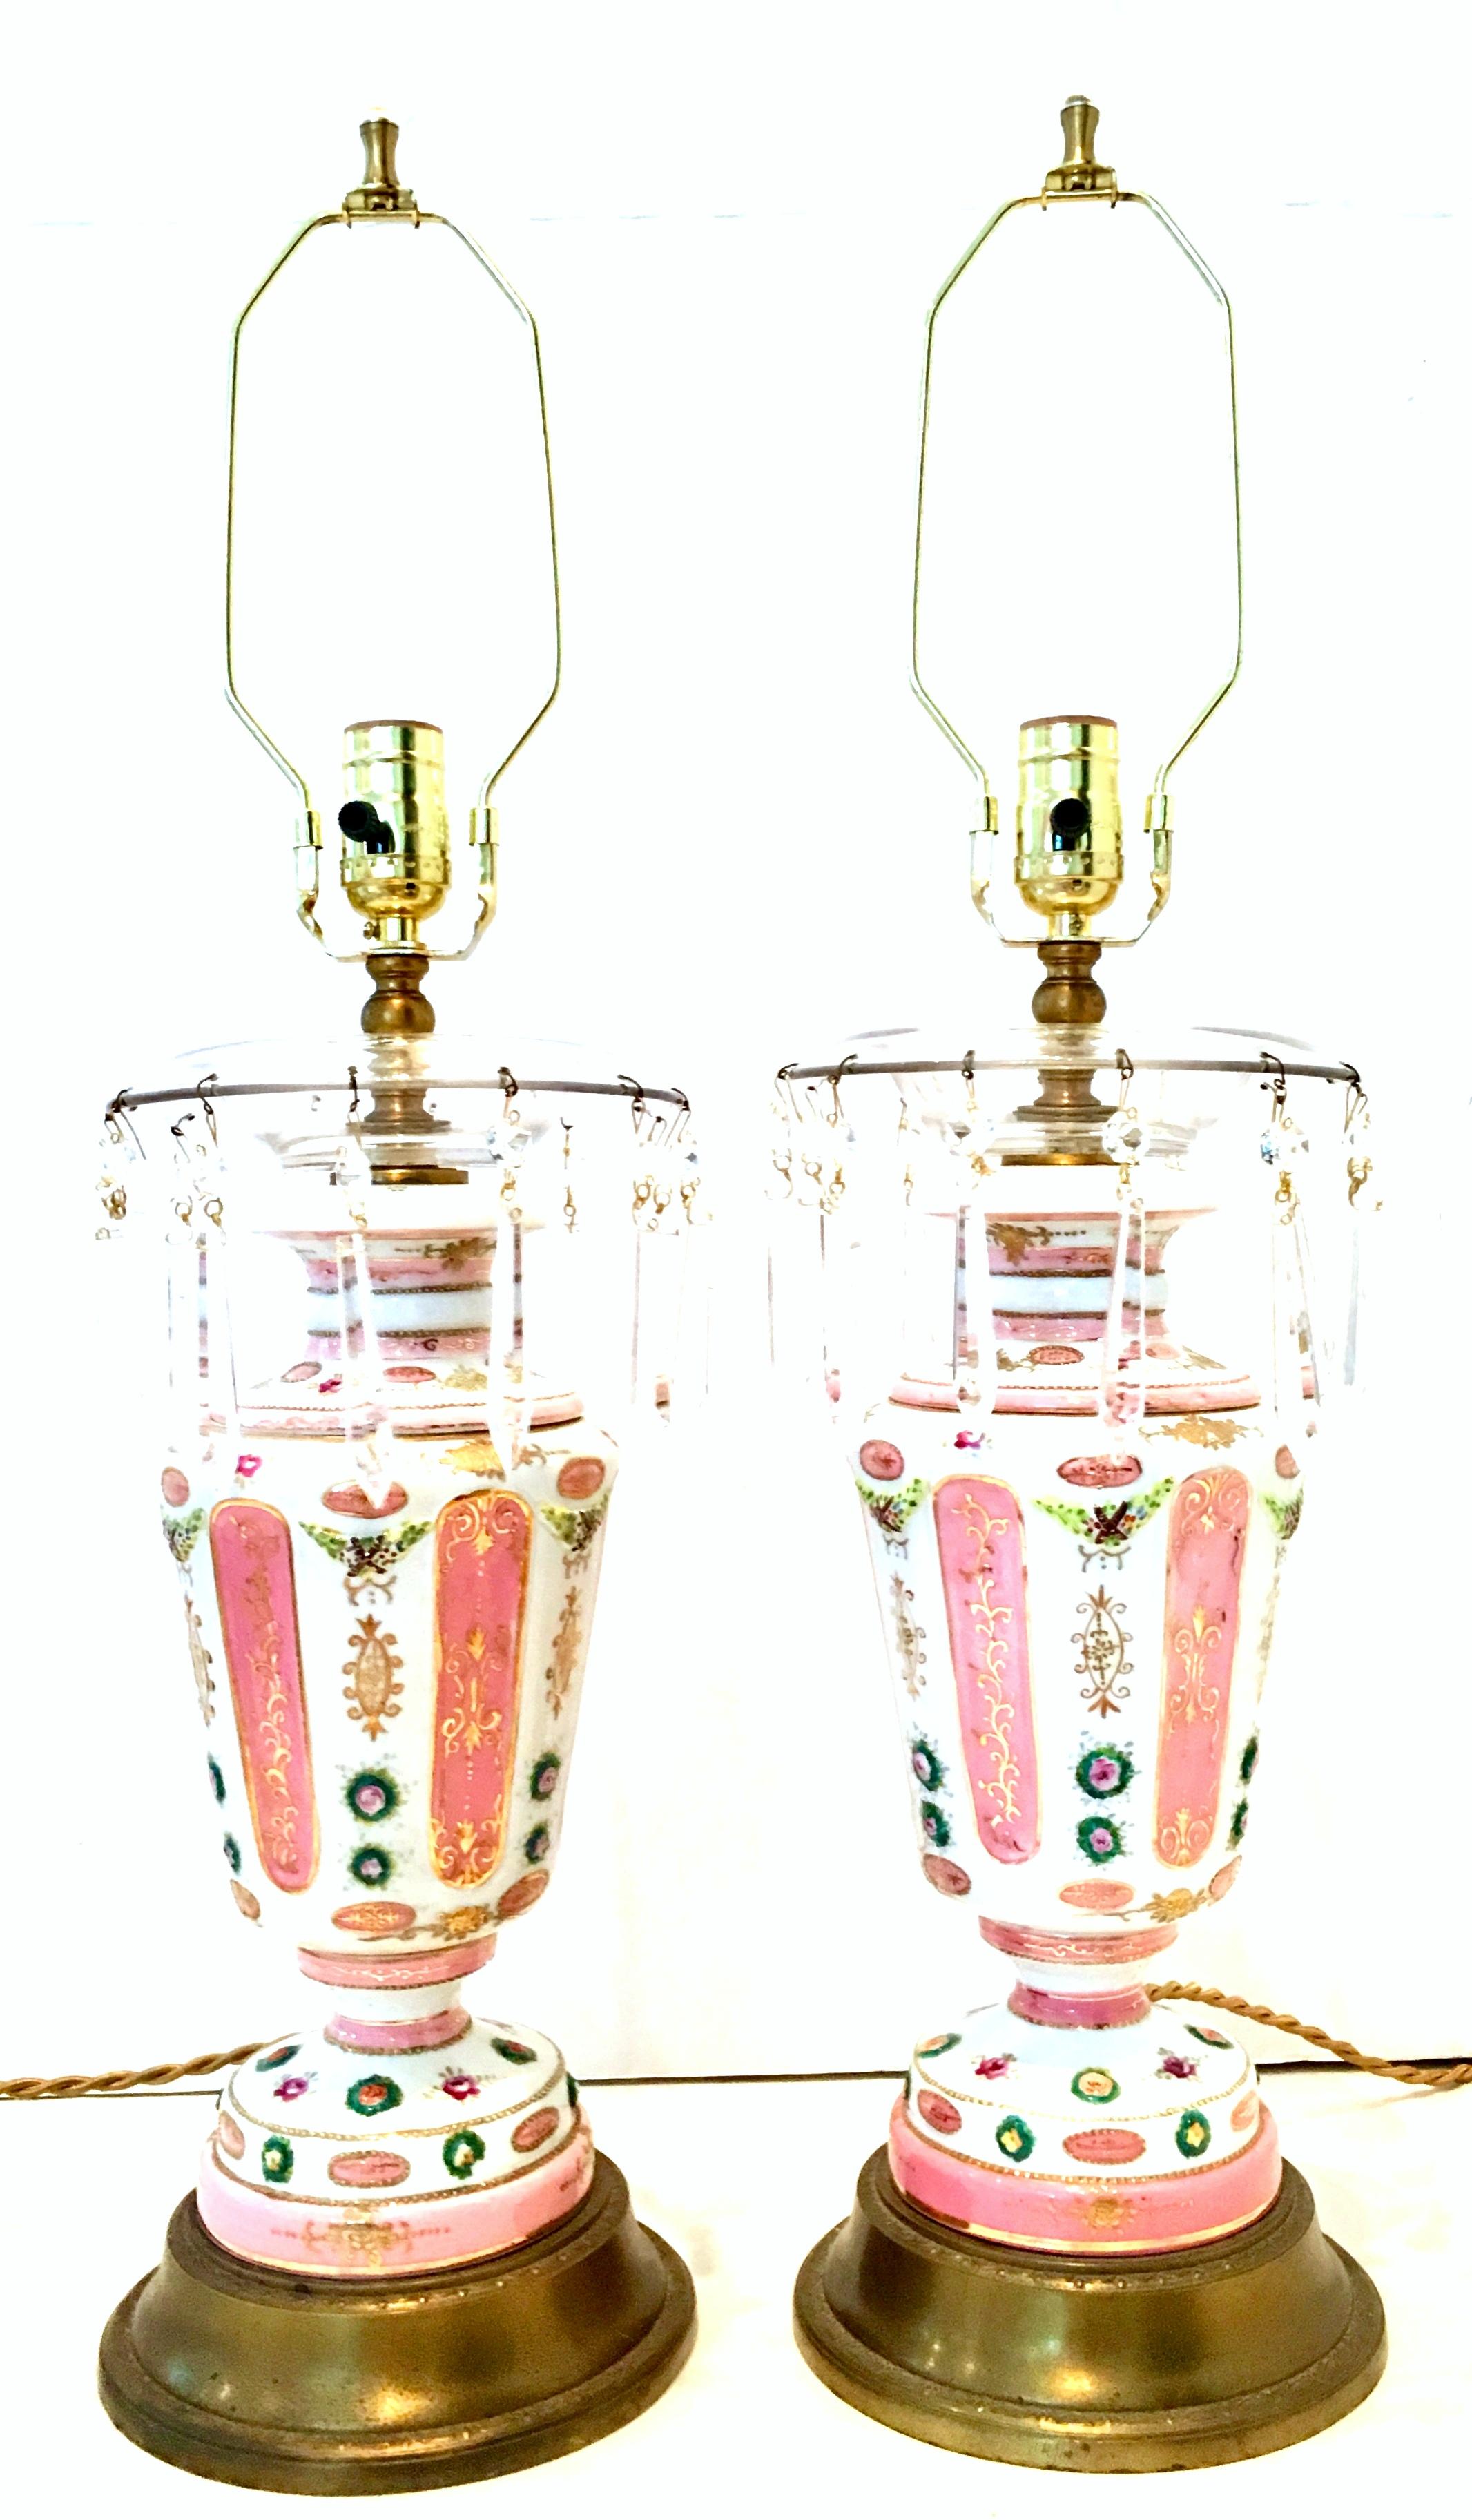 Antique pair of French Continental style hand-painted porcelain and crystal prism table lamps. These rare and stunning 22-karat raised gold detail and hand-painted lamps, feature a bright white ground with pink and green tones. Original